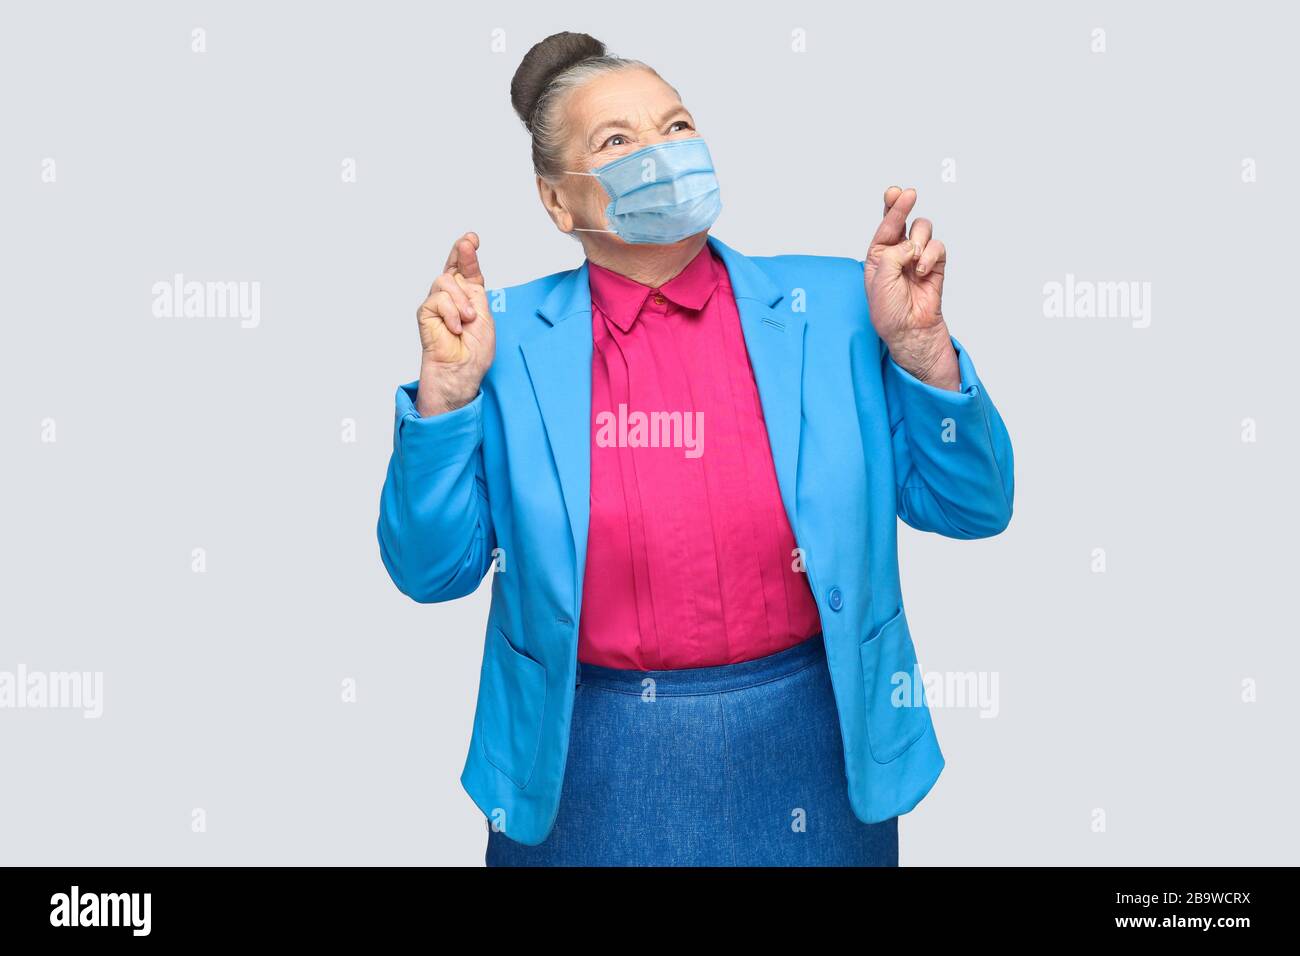 Hopeful with surgical medical mask woman crossed fingers and wish. Grandmother with light blue suit and pink shirt standing with collected bun hair. i Stock Photo